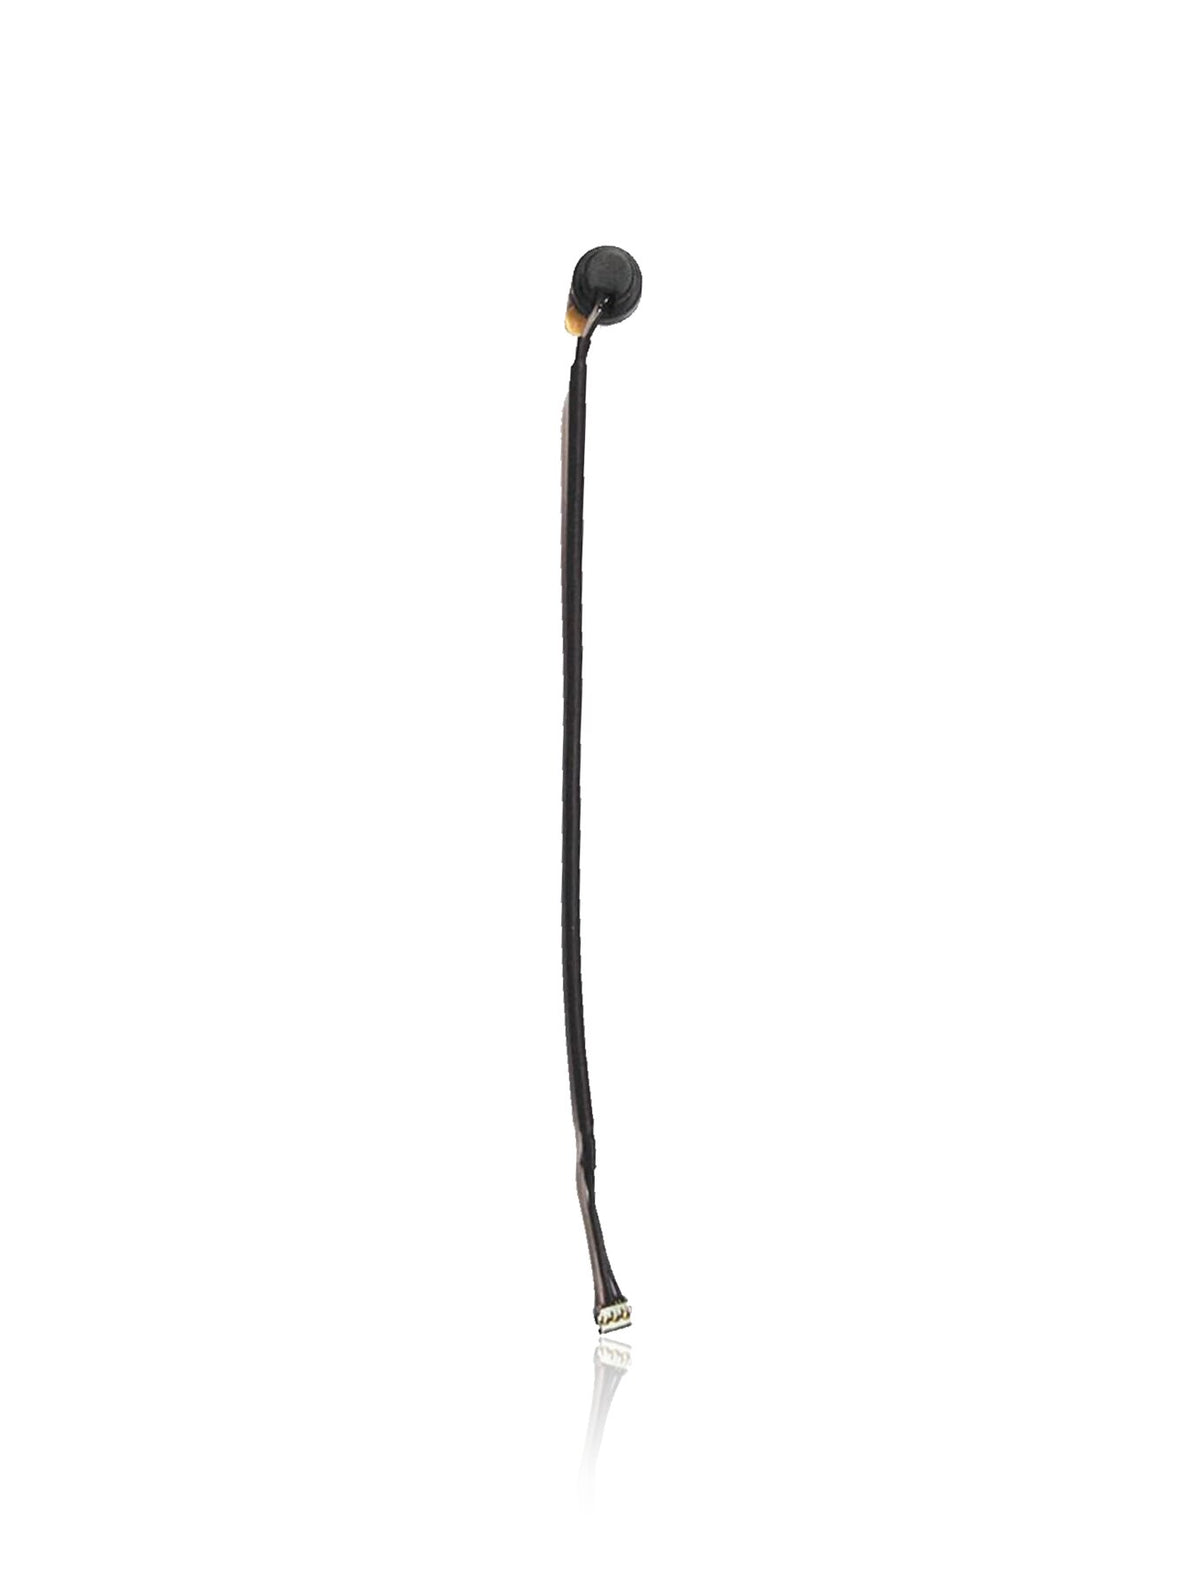 MICROPHONE CABLE COMPATIBLE FOR MACBOOK UNIBODY 13" A1278 (LATE 2008)